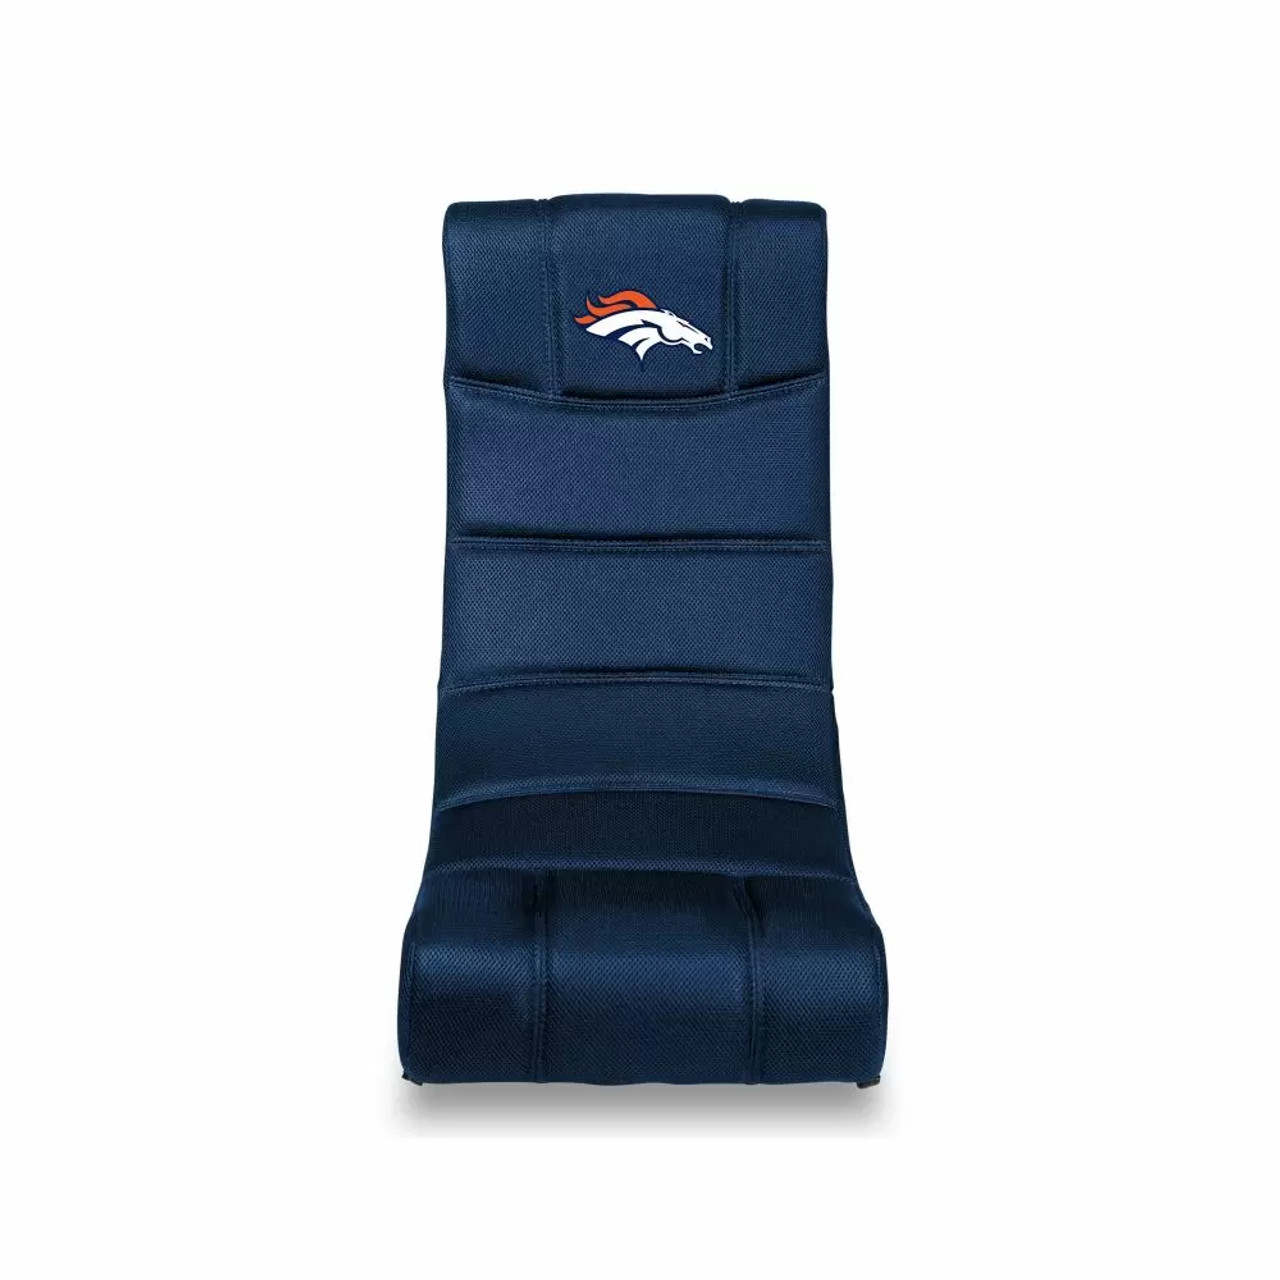 114-1003, Denver, Broncos, Video, Chair, Bluetooth, NFL, Imperial FREE SHIPPING